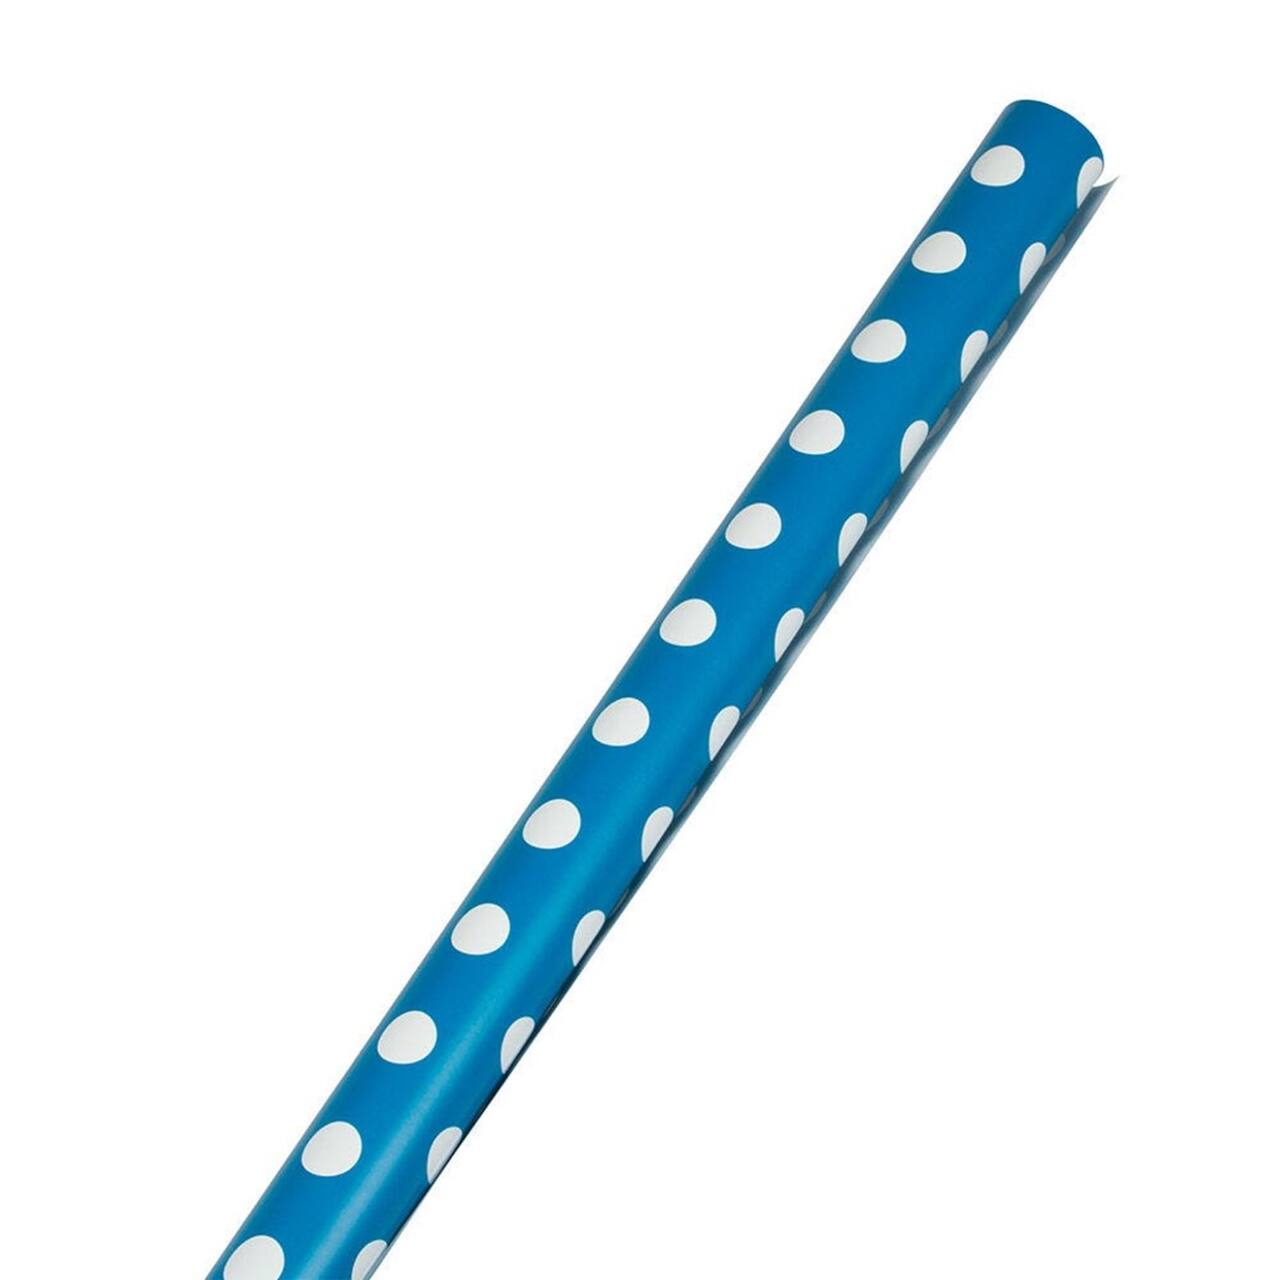 JAM Paper Wrapping Paper with White Polka Dots, 3ct.